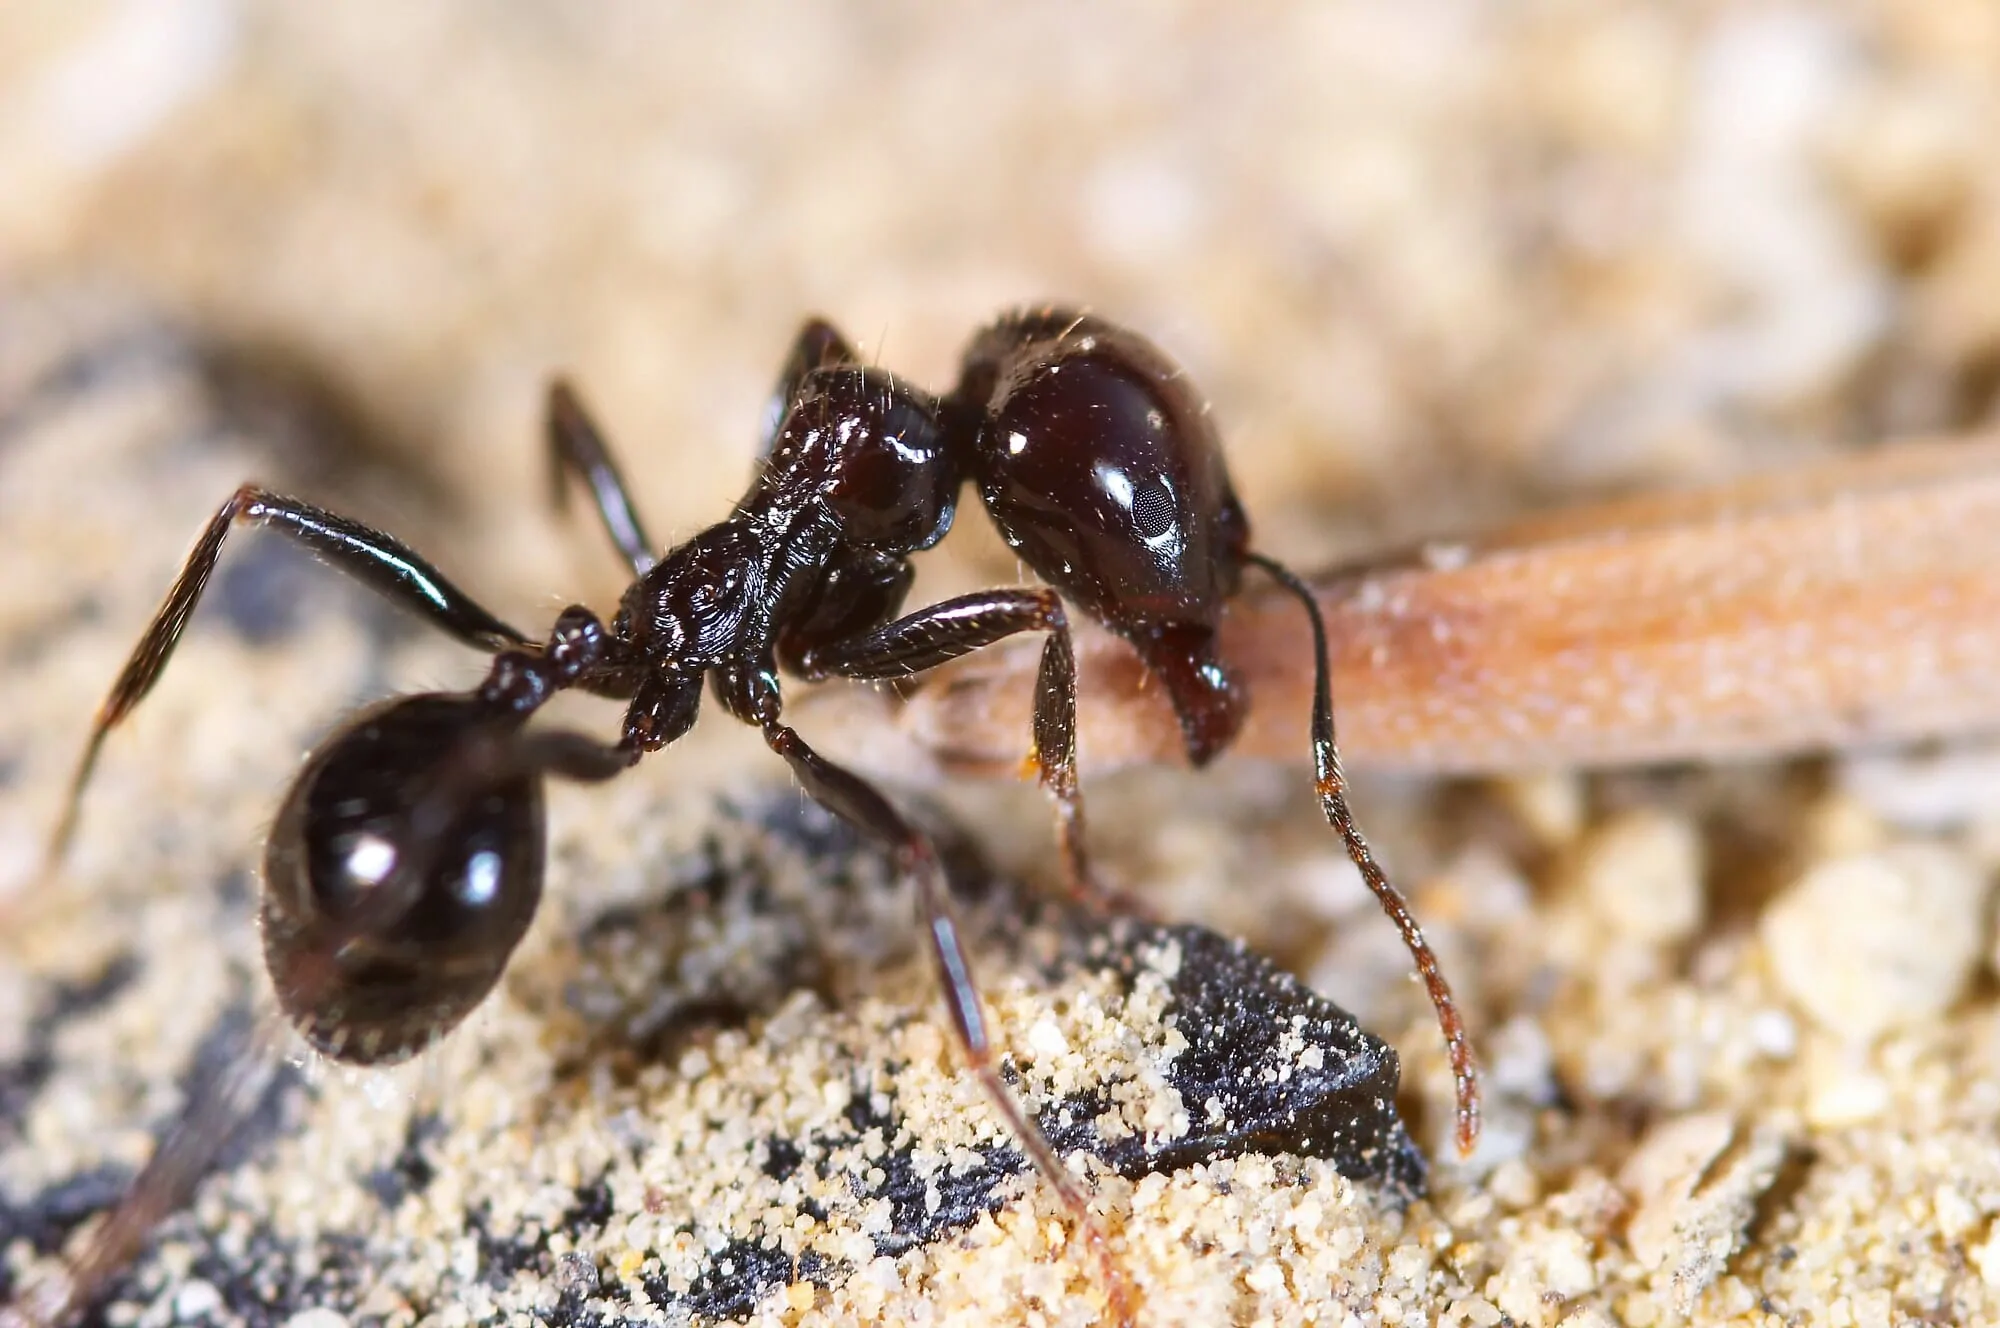 How to get rid of ants in the kitchen